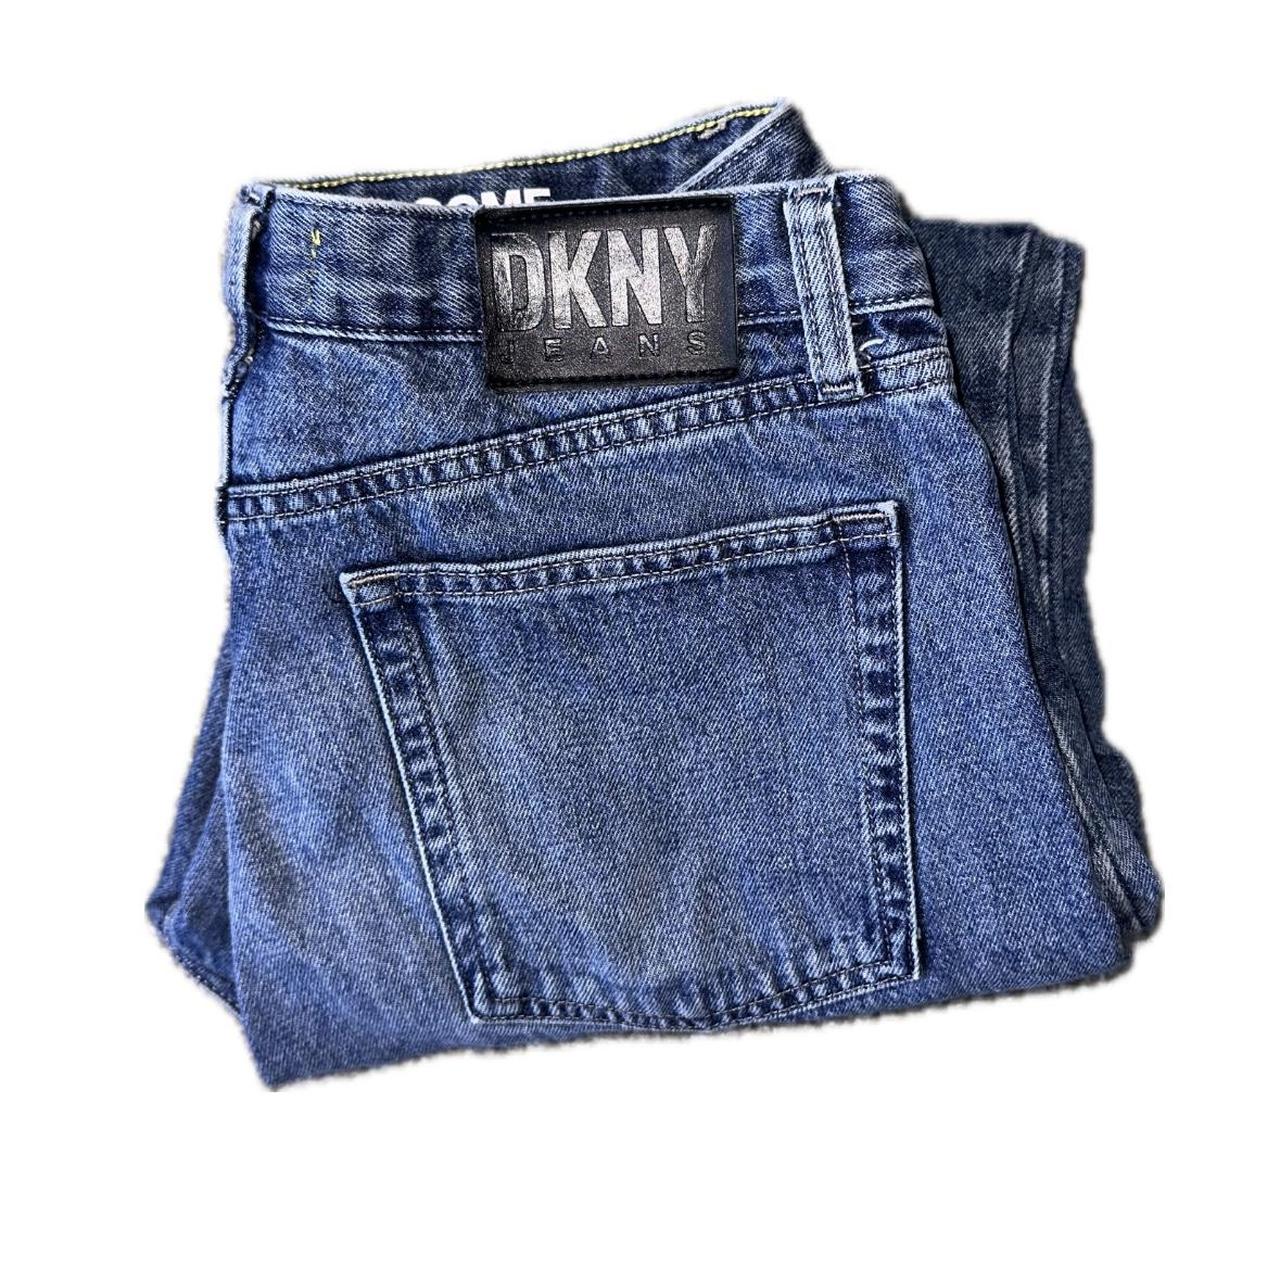 DKNY Jeans , mid rise, 28/6 , lightly worn, just not